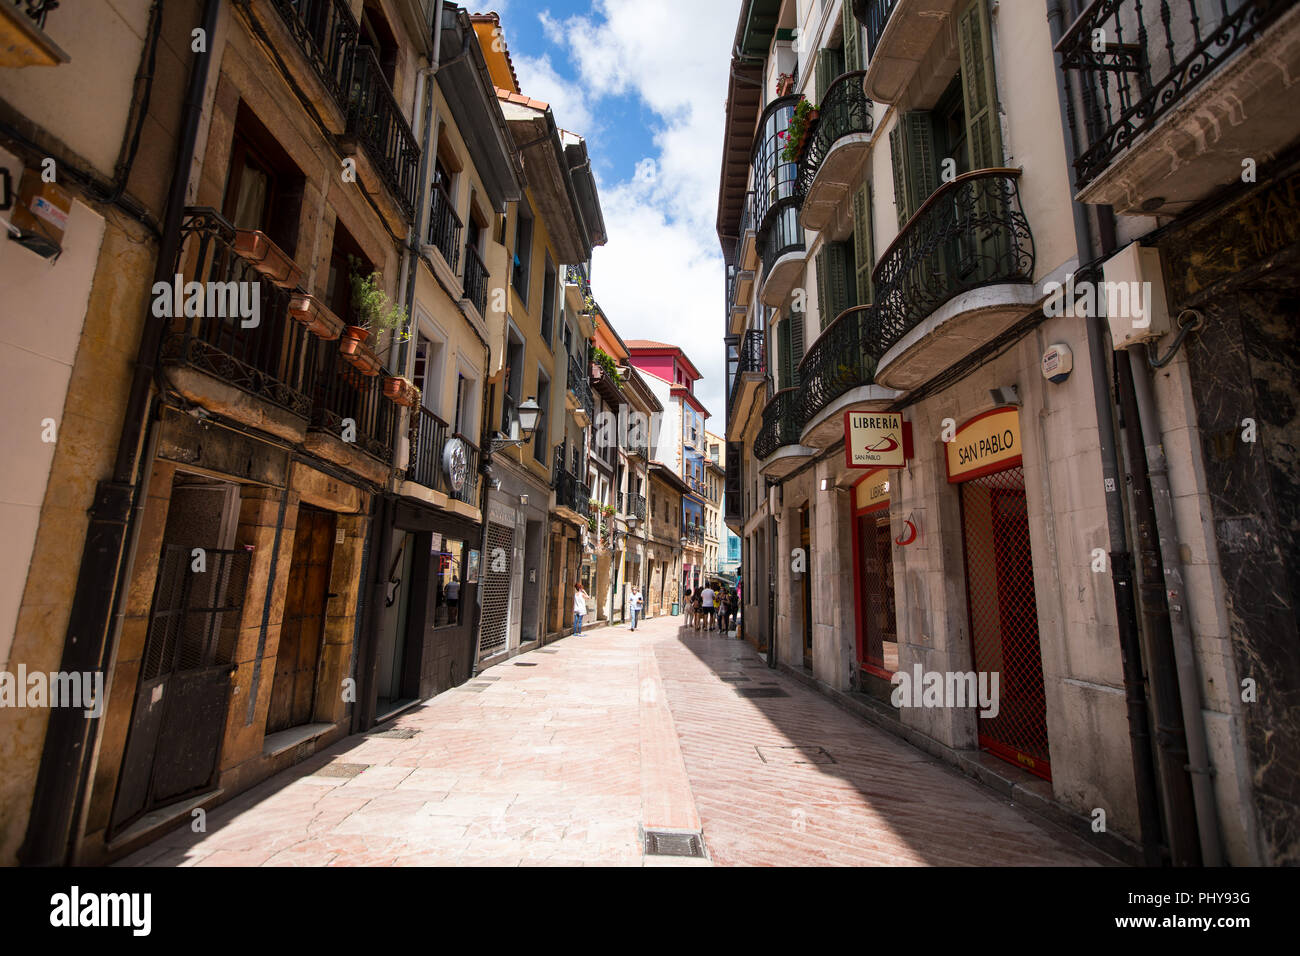 The city of Oviedo in Asturias, North West Spain Stock Photo